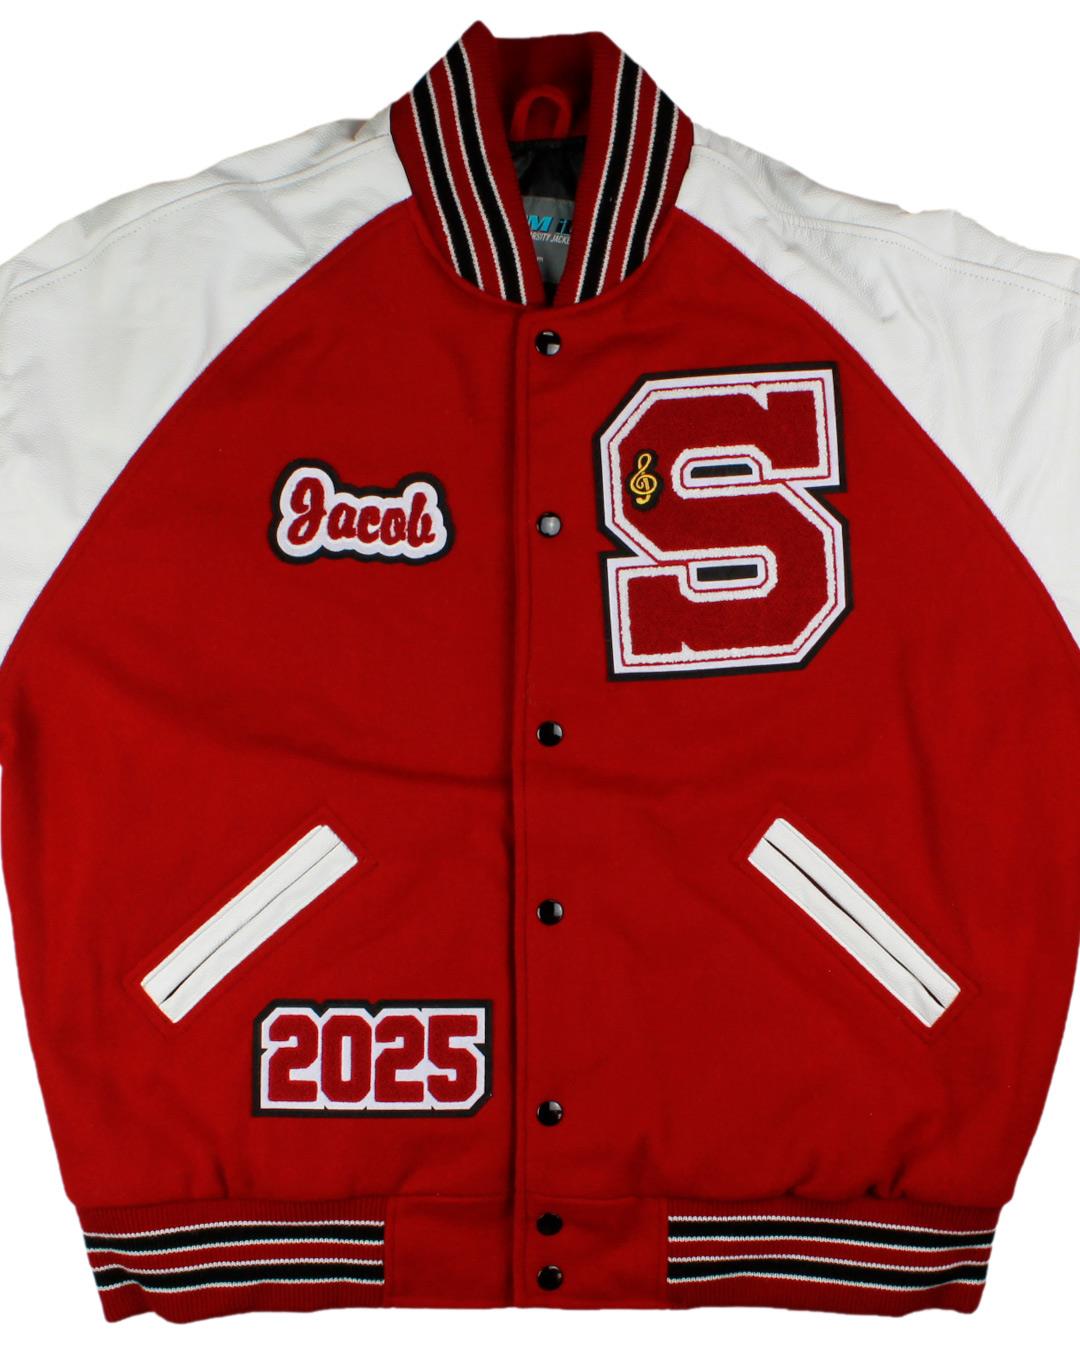 Snohomish High School Letter Jacket, Snohomish, WA  - Front